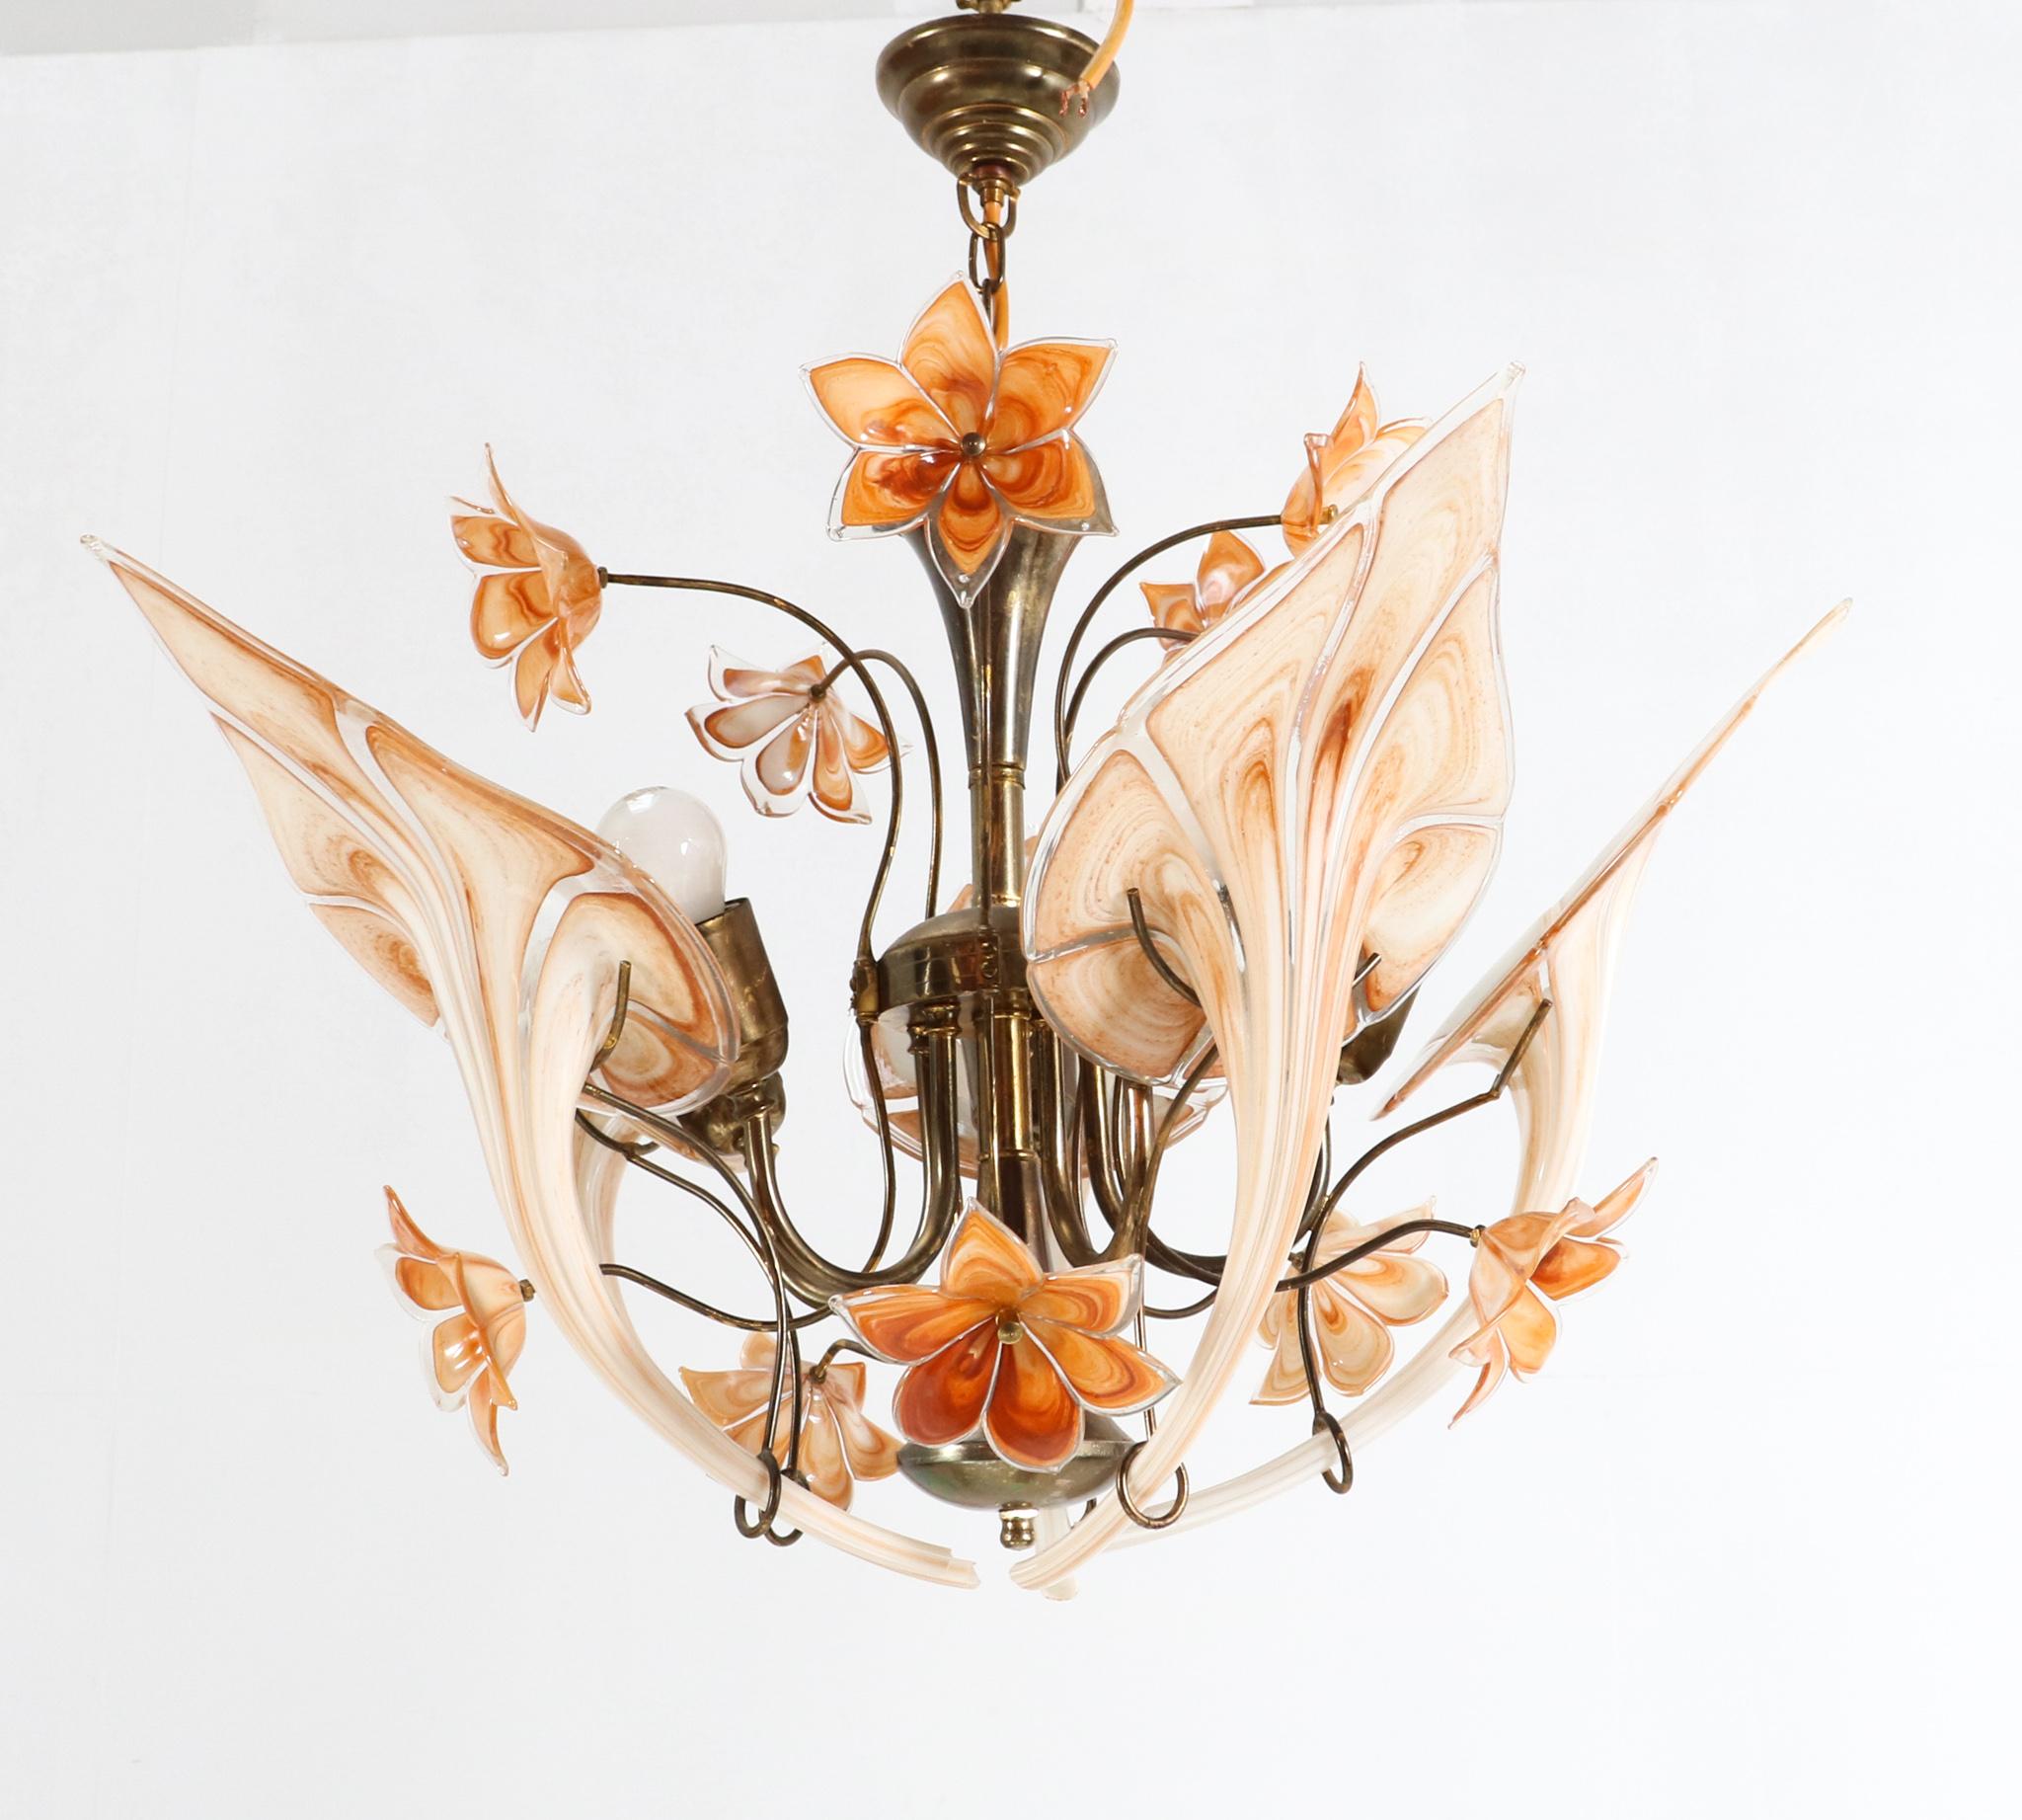 Amazing  Mid-Century Modern Vintage Murano glass five light pendant chandelier.
Design by Franco Luce for Seguso.
Striking Italian design from the 1970s.
Handcrafted forged metal frame with original gilt finish.
The five original Murano leaves which